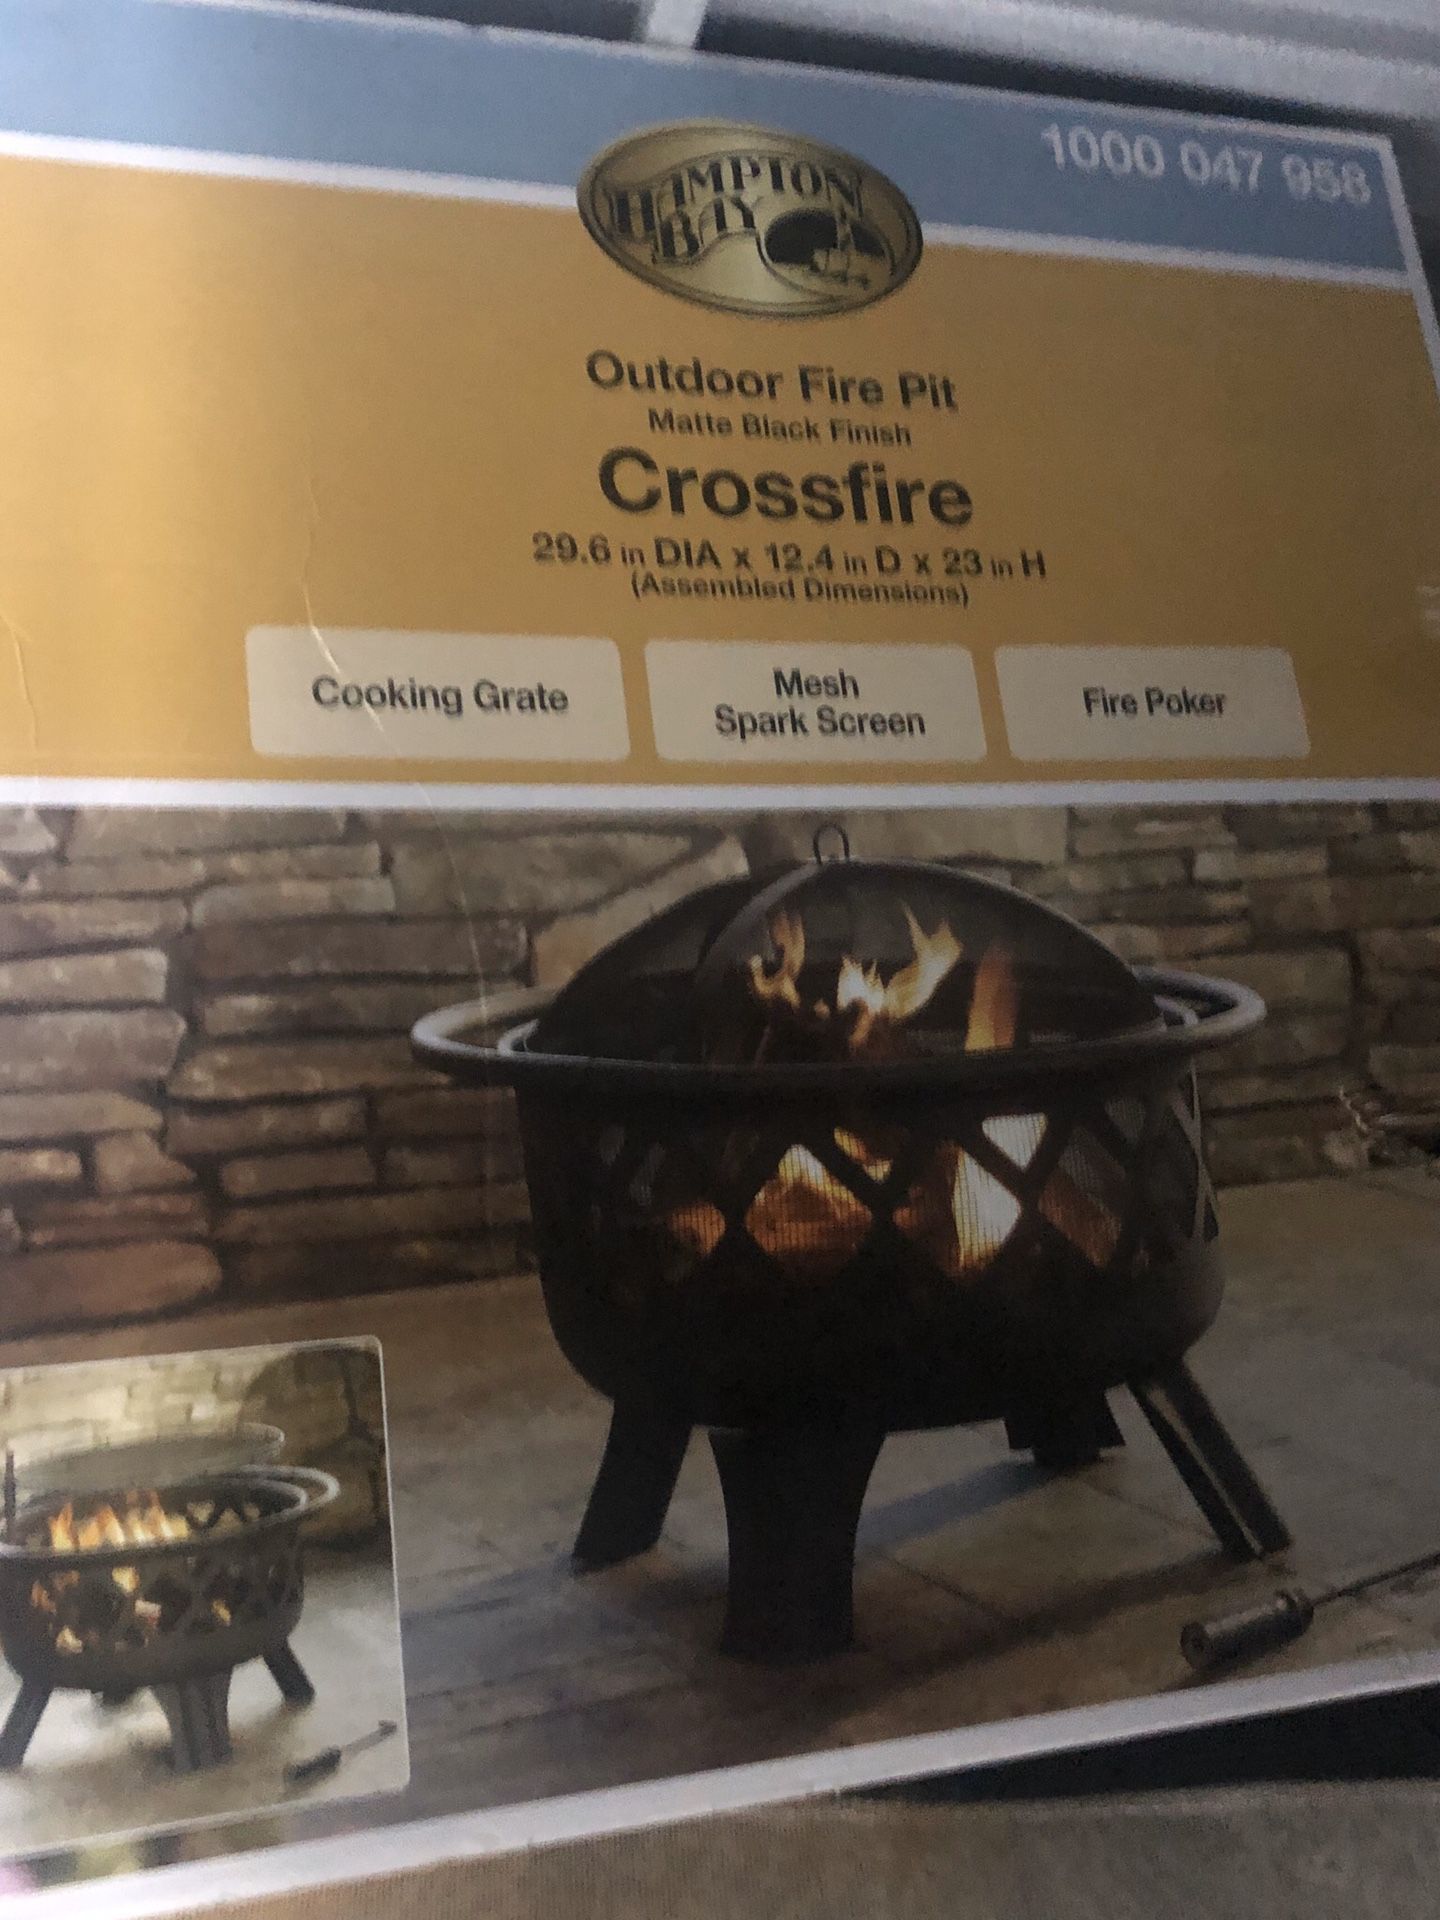 Outdoor Fire pit crossfire